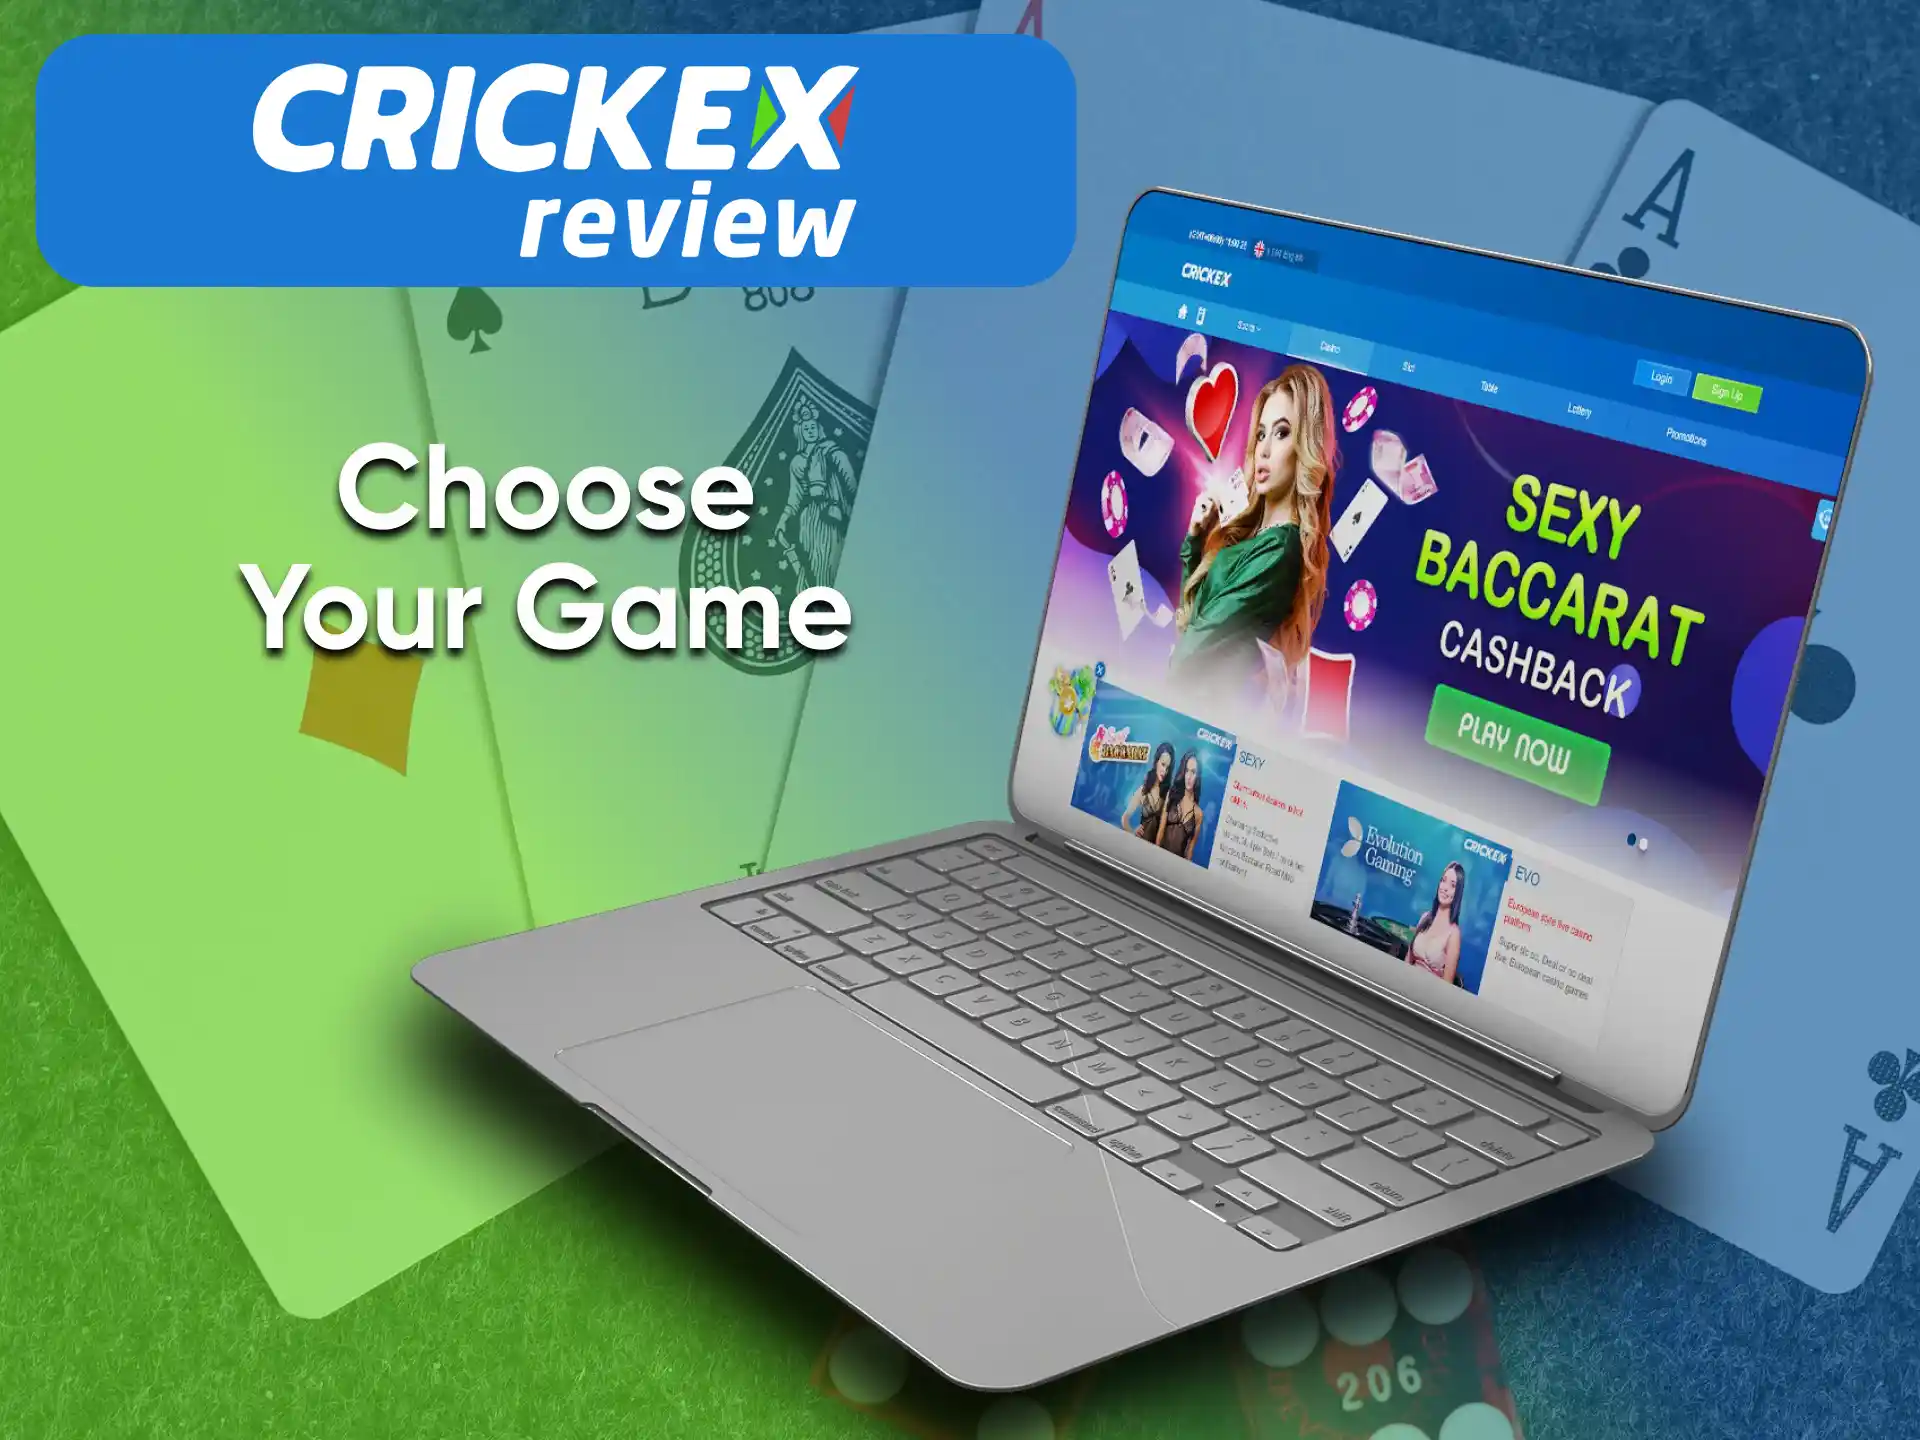 At Crickex Casino you can choose the game of your choice.